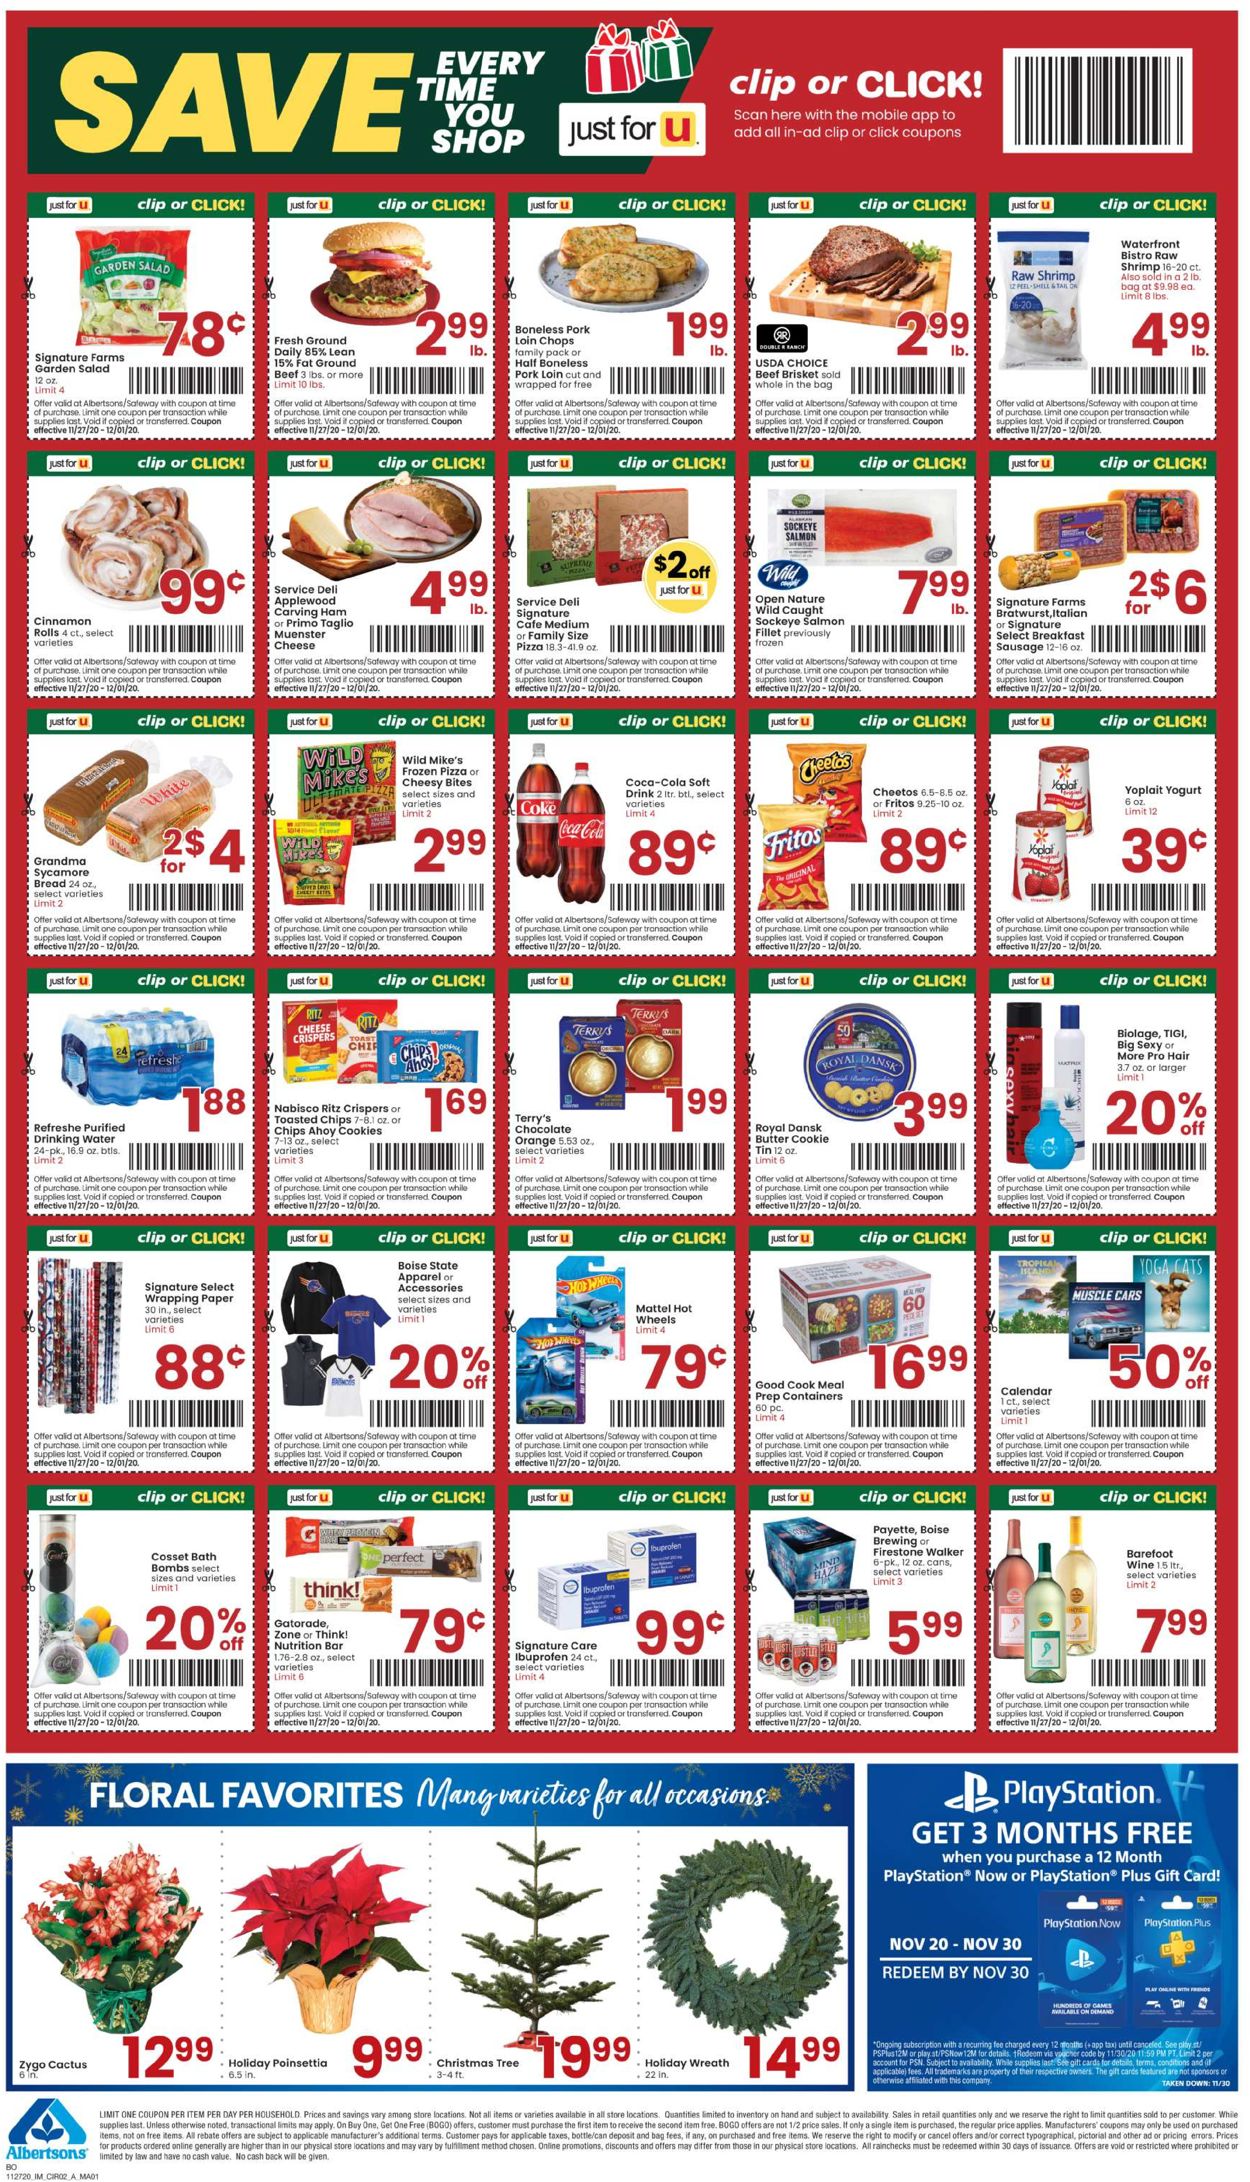 Catalogue Albertsons Black Friday ad 2020 from 11/27/2020